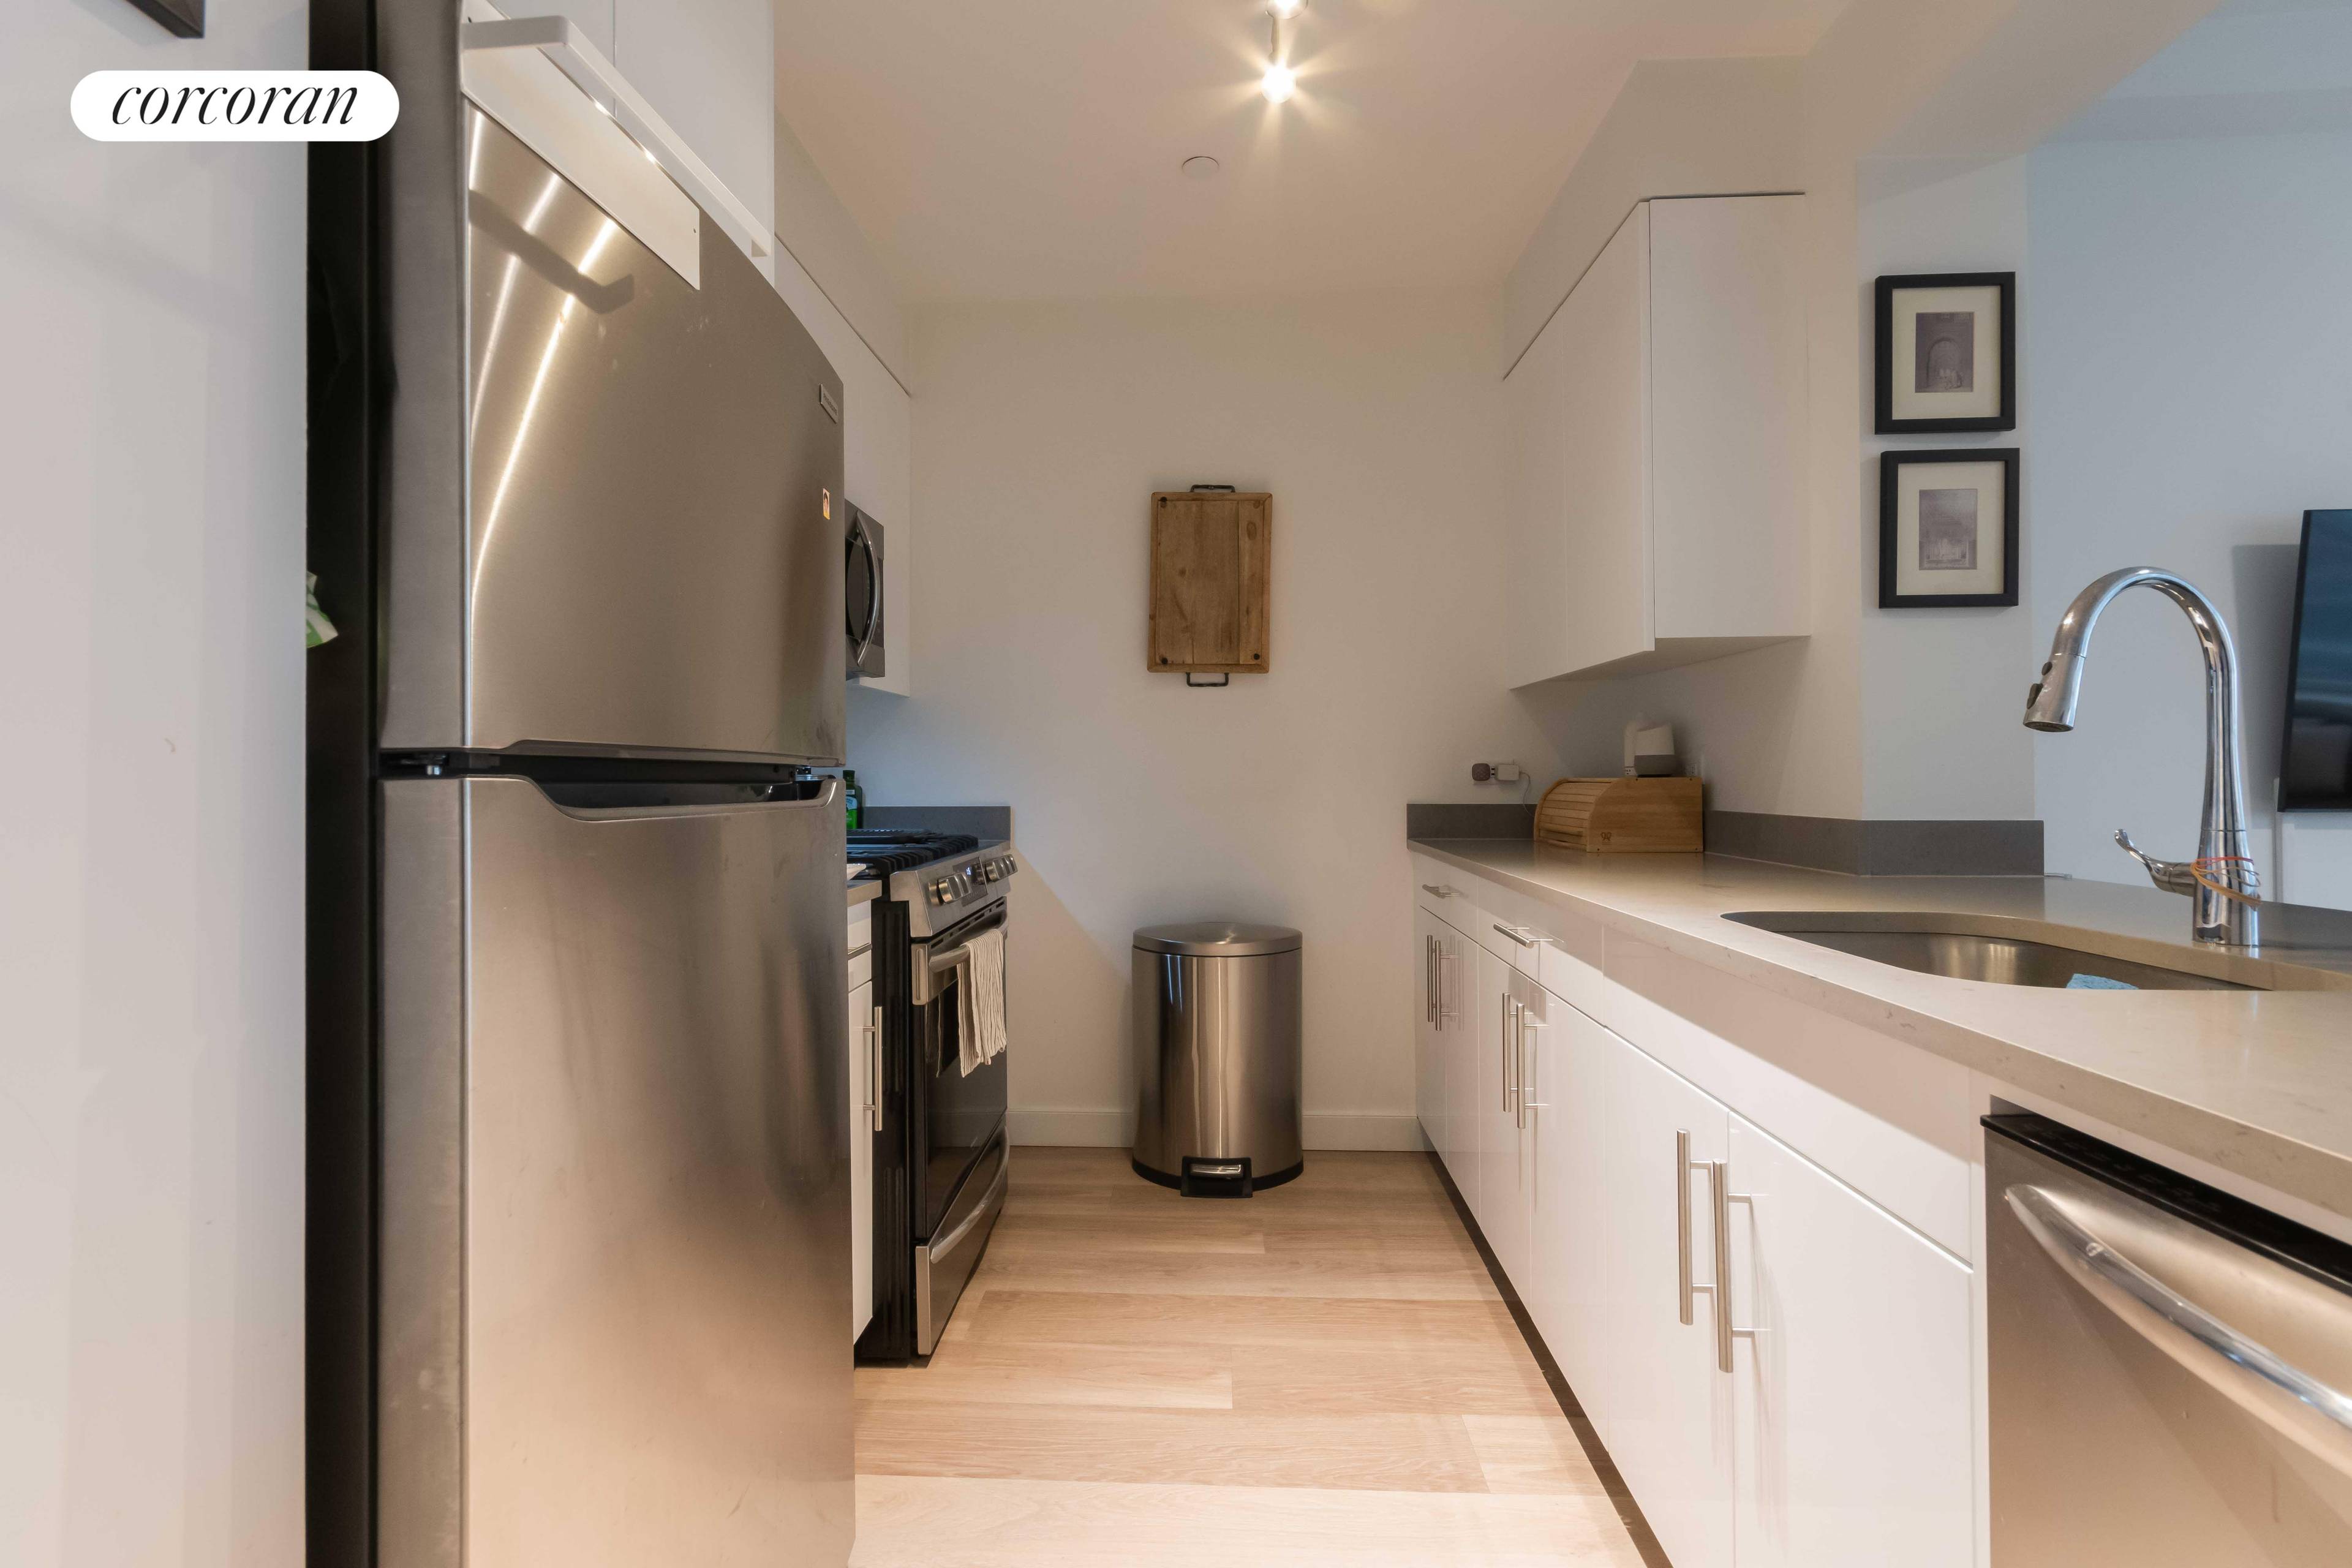 5241 Centre Blvd is one of the newest contemporary apartment rental buildings in the Hunters Point South neighborhood Welcome to this gorgeous 2 bedroom 2 bathroom apartment with plenty of ...